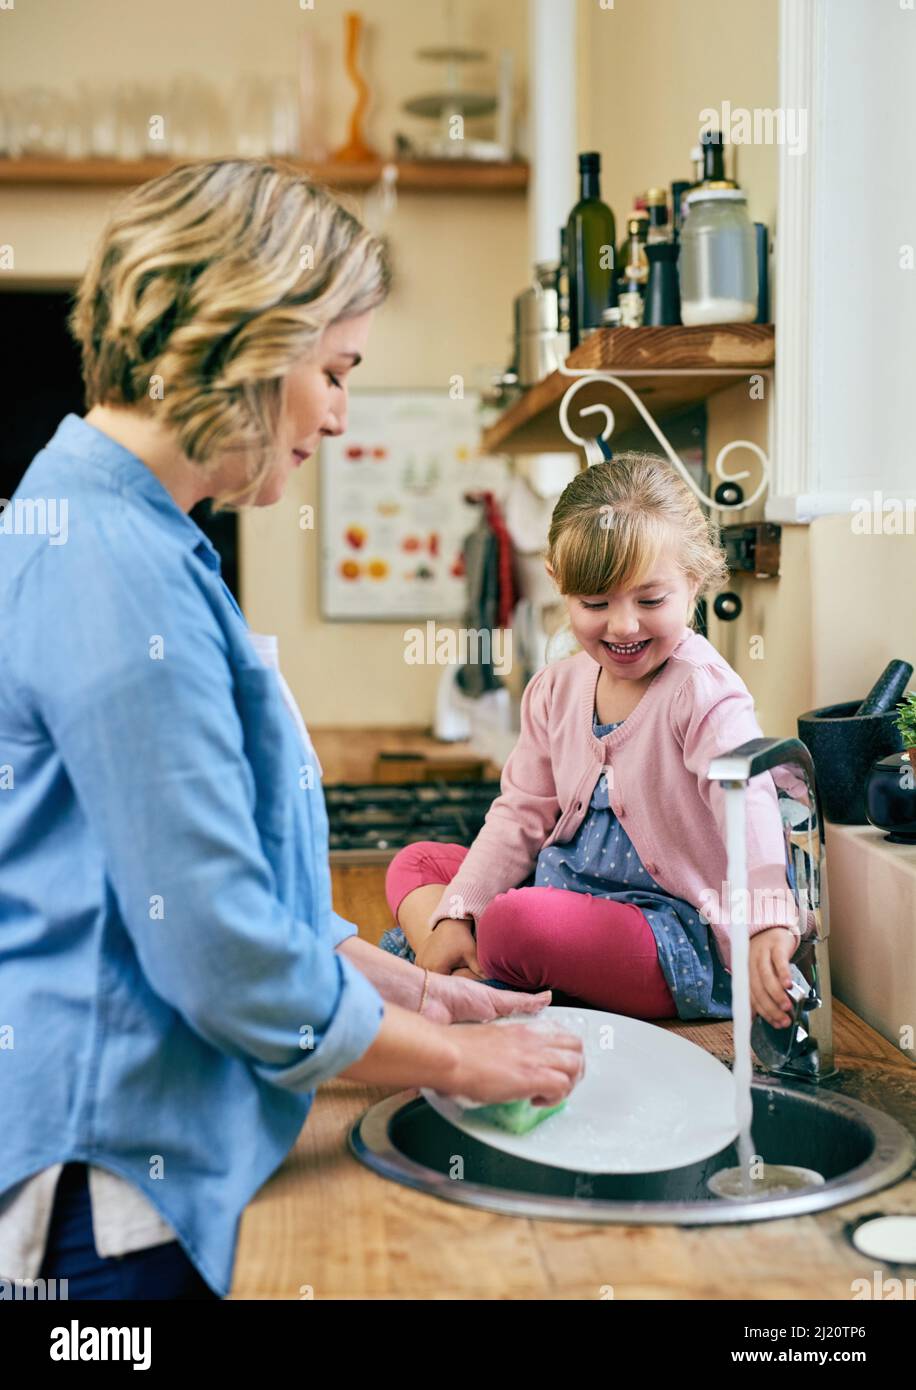 Teaching her daughter the domestic basics. Shot of a cheerful young mother and her young little daughter washing dishes together at home. Stock Photo